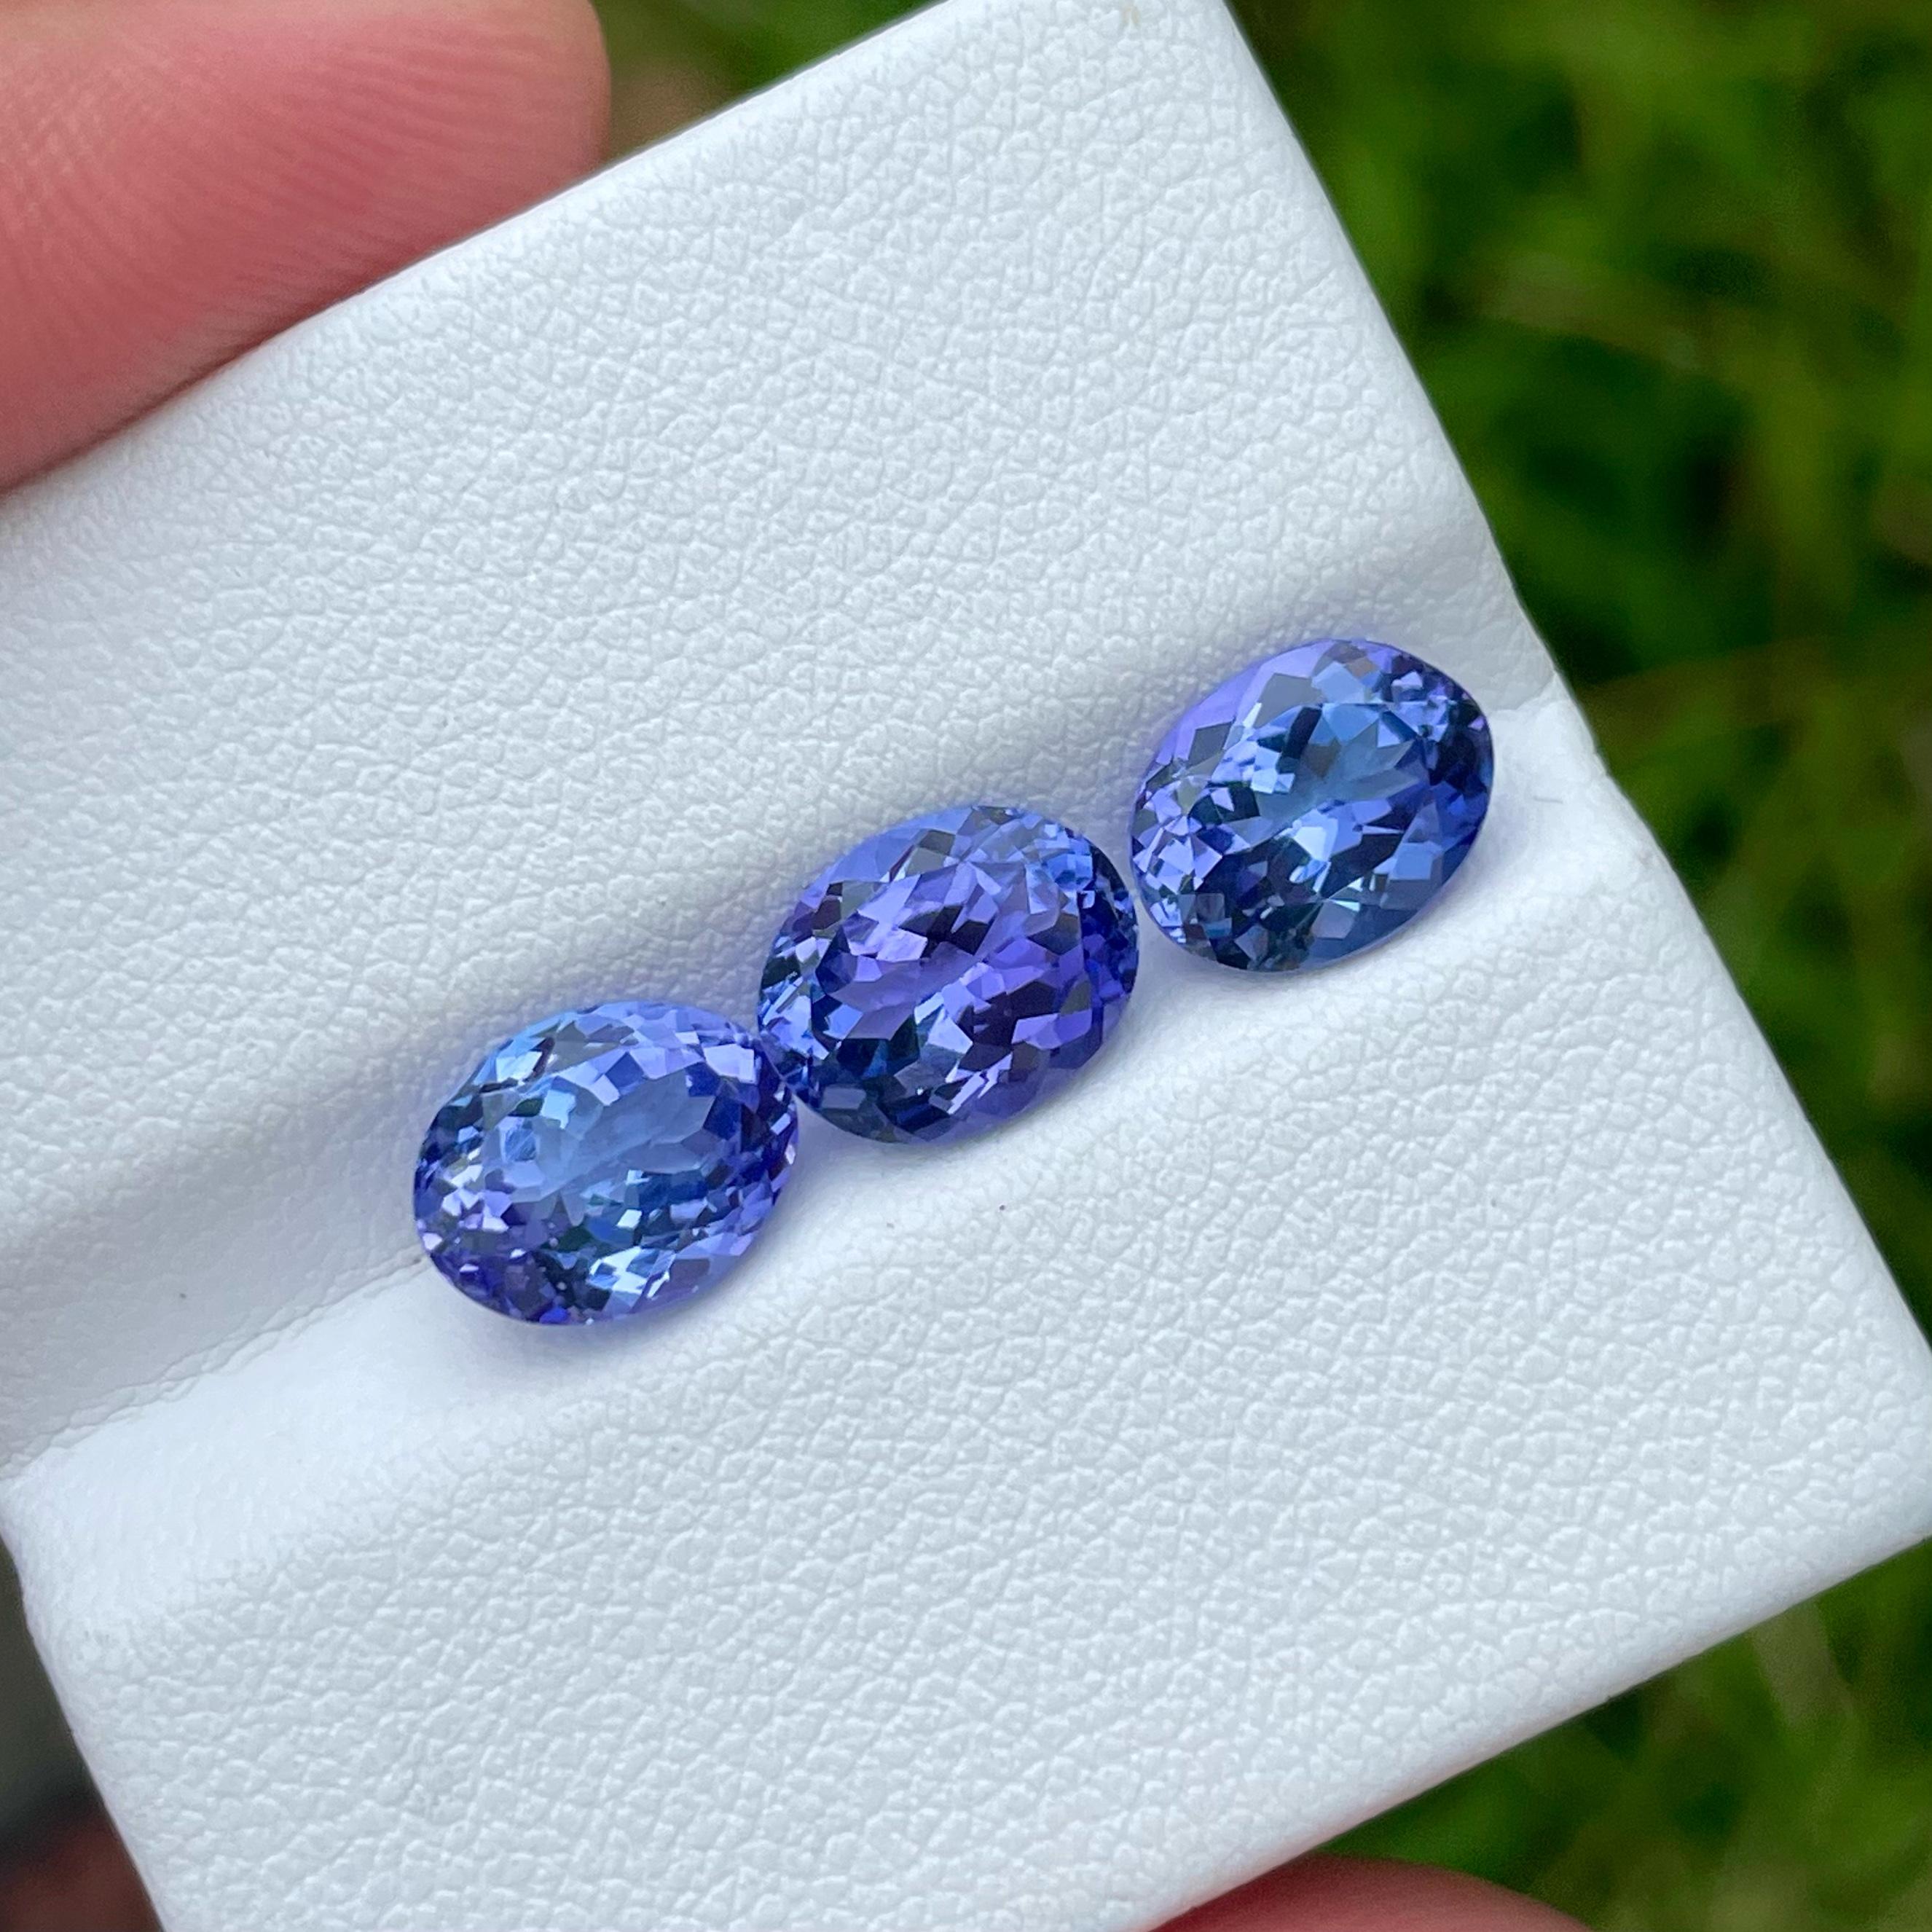 Weight 6.35 carats 
Dimensions 9 x 7 x 5 mm 
Treatment Heated 
Origin Tanzania 
Clarity Eye Clean 
Shape Oval 
Cut Oval



Discover the captivating allure of our exquisite 6.35 carat Oval Shaped Blue Tanzanite Stone, a true masterpiece of nature